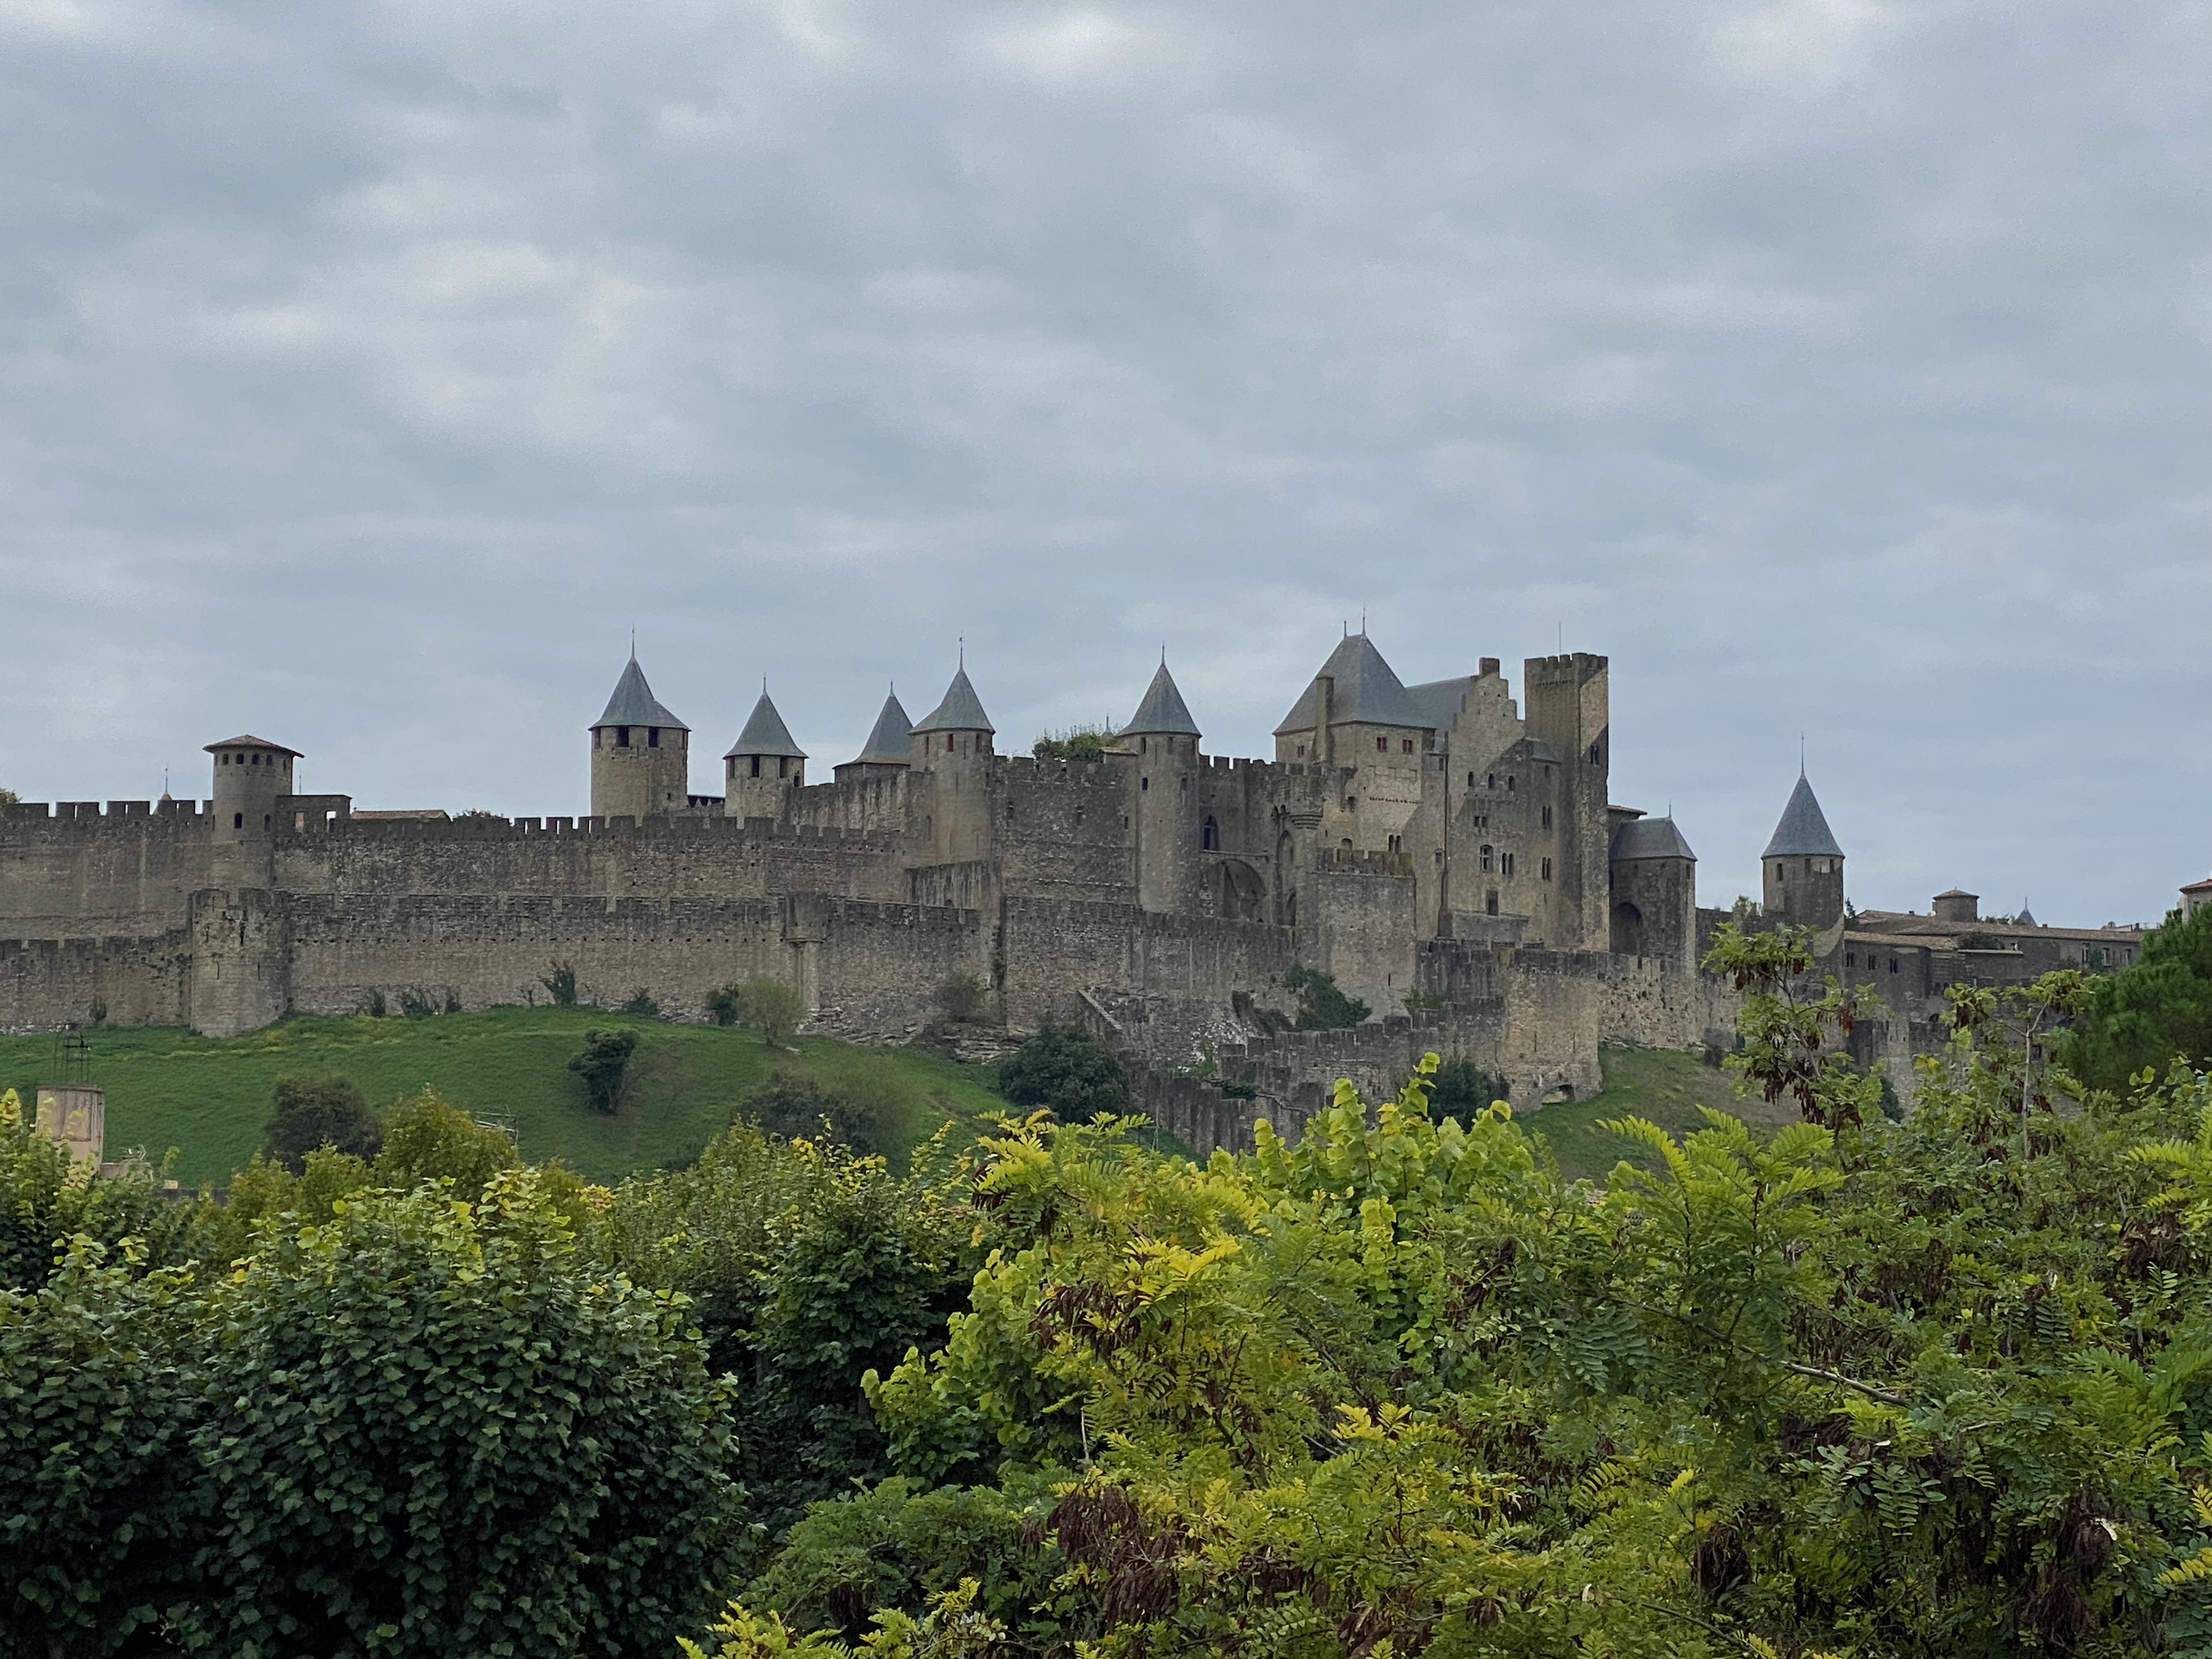 View of the fortress of Carcasonne